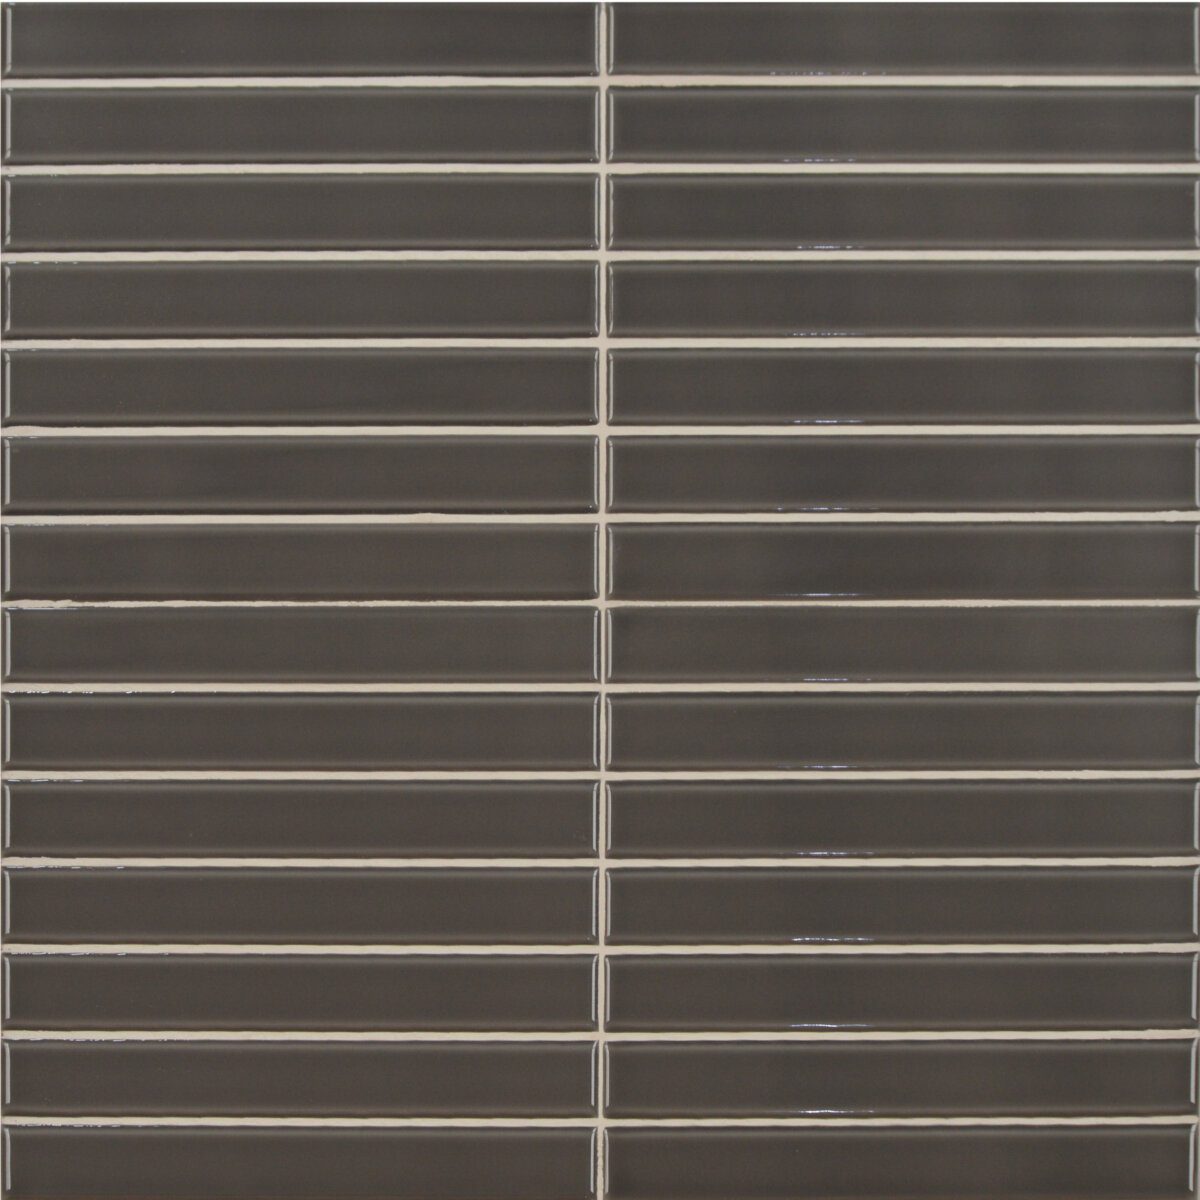 145-ptoo856 Kit Kat Marengo Gloss 25x200mm_Stiles_Product_Image_white grout